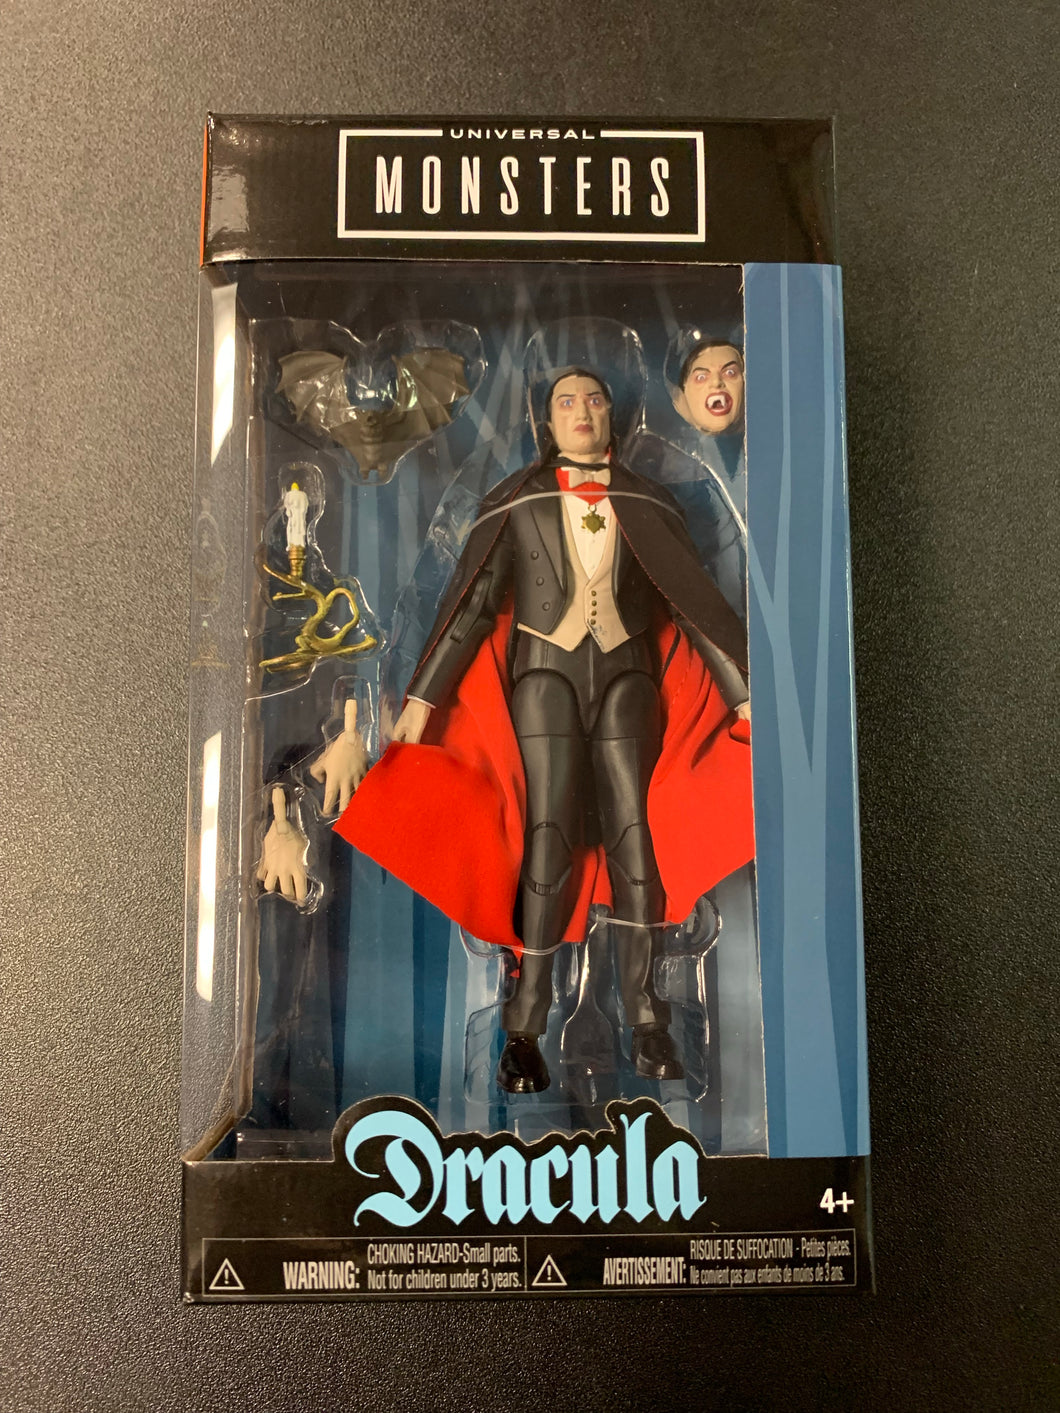 UNIVERSAL MONSTERS DRACULA 6” SCALE ACTION FIGURE